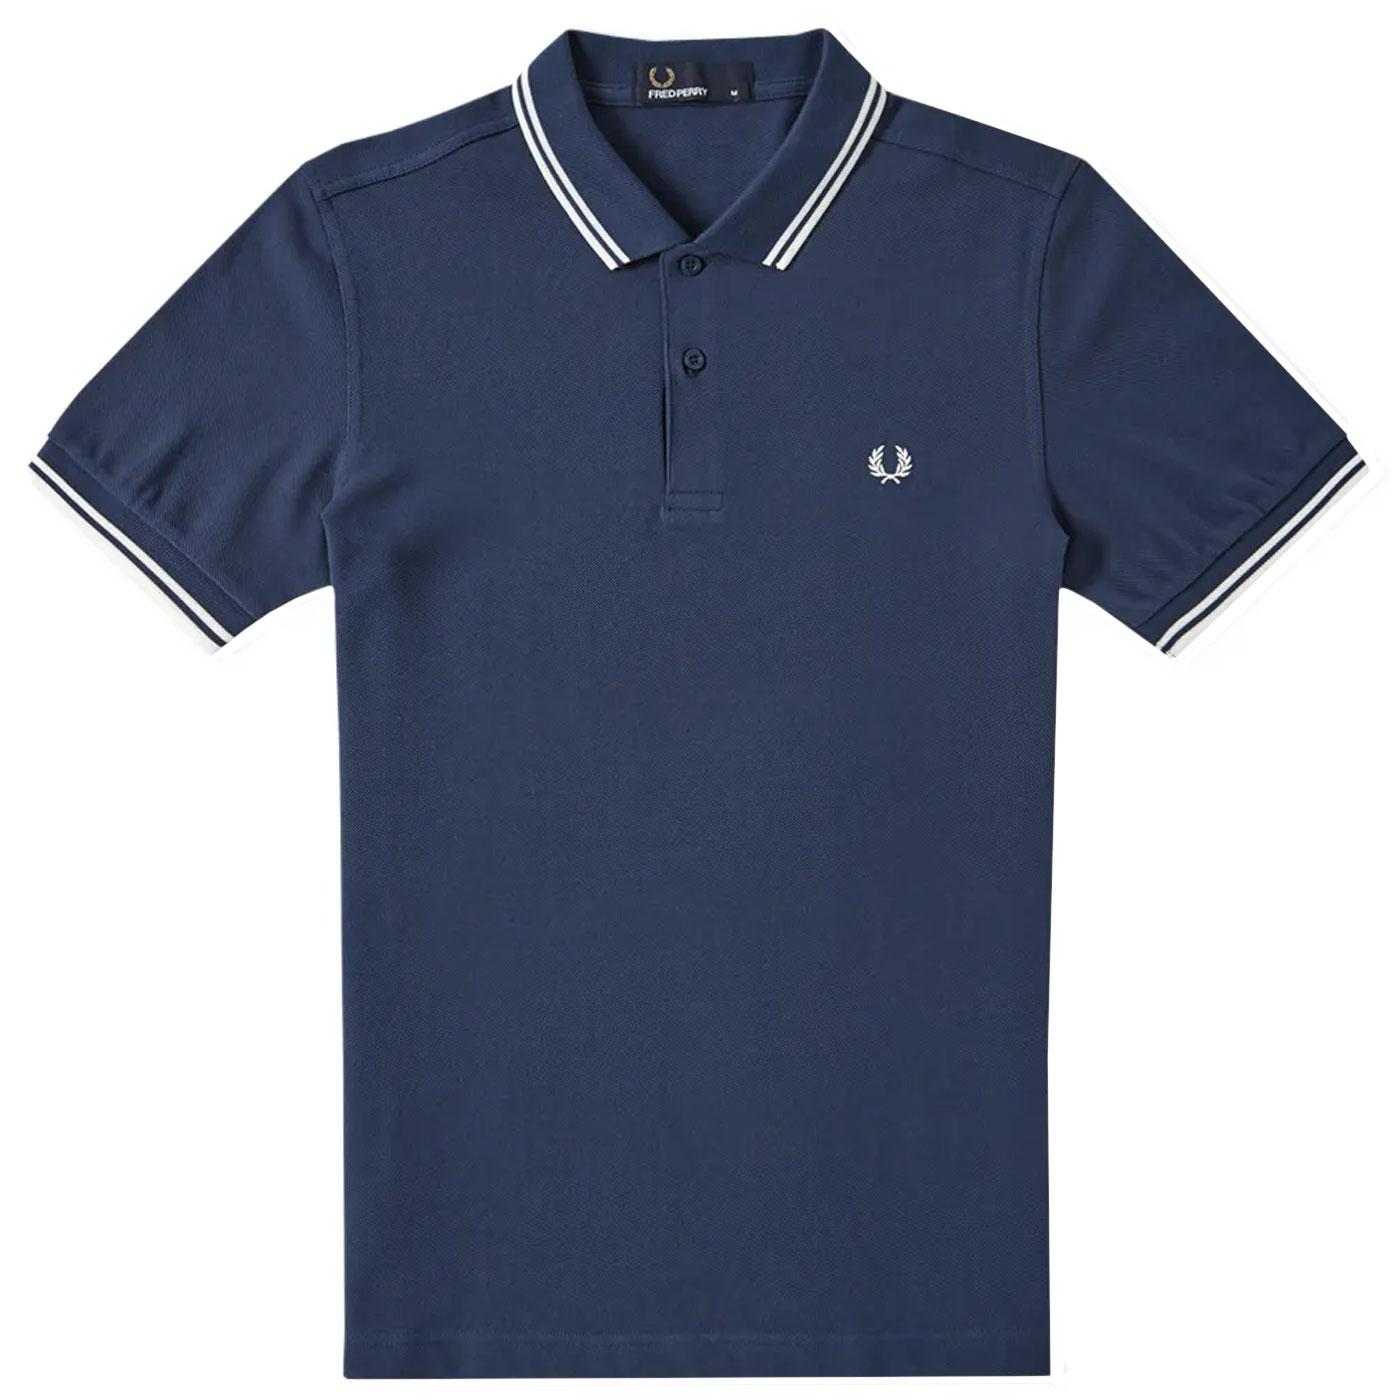 FRED PERRY Retro Indie Mod Twin Tipped Polo in Service Blue